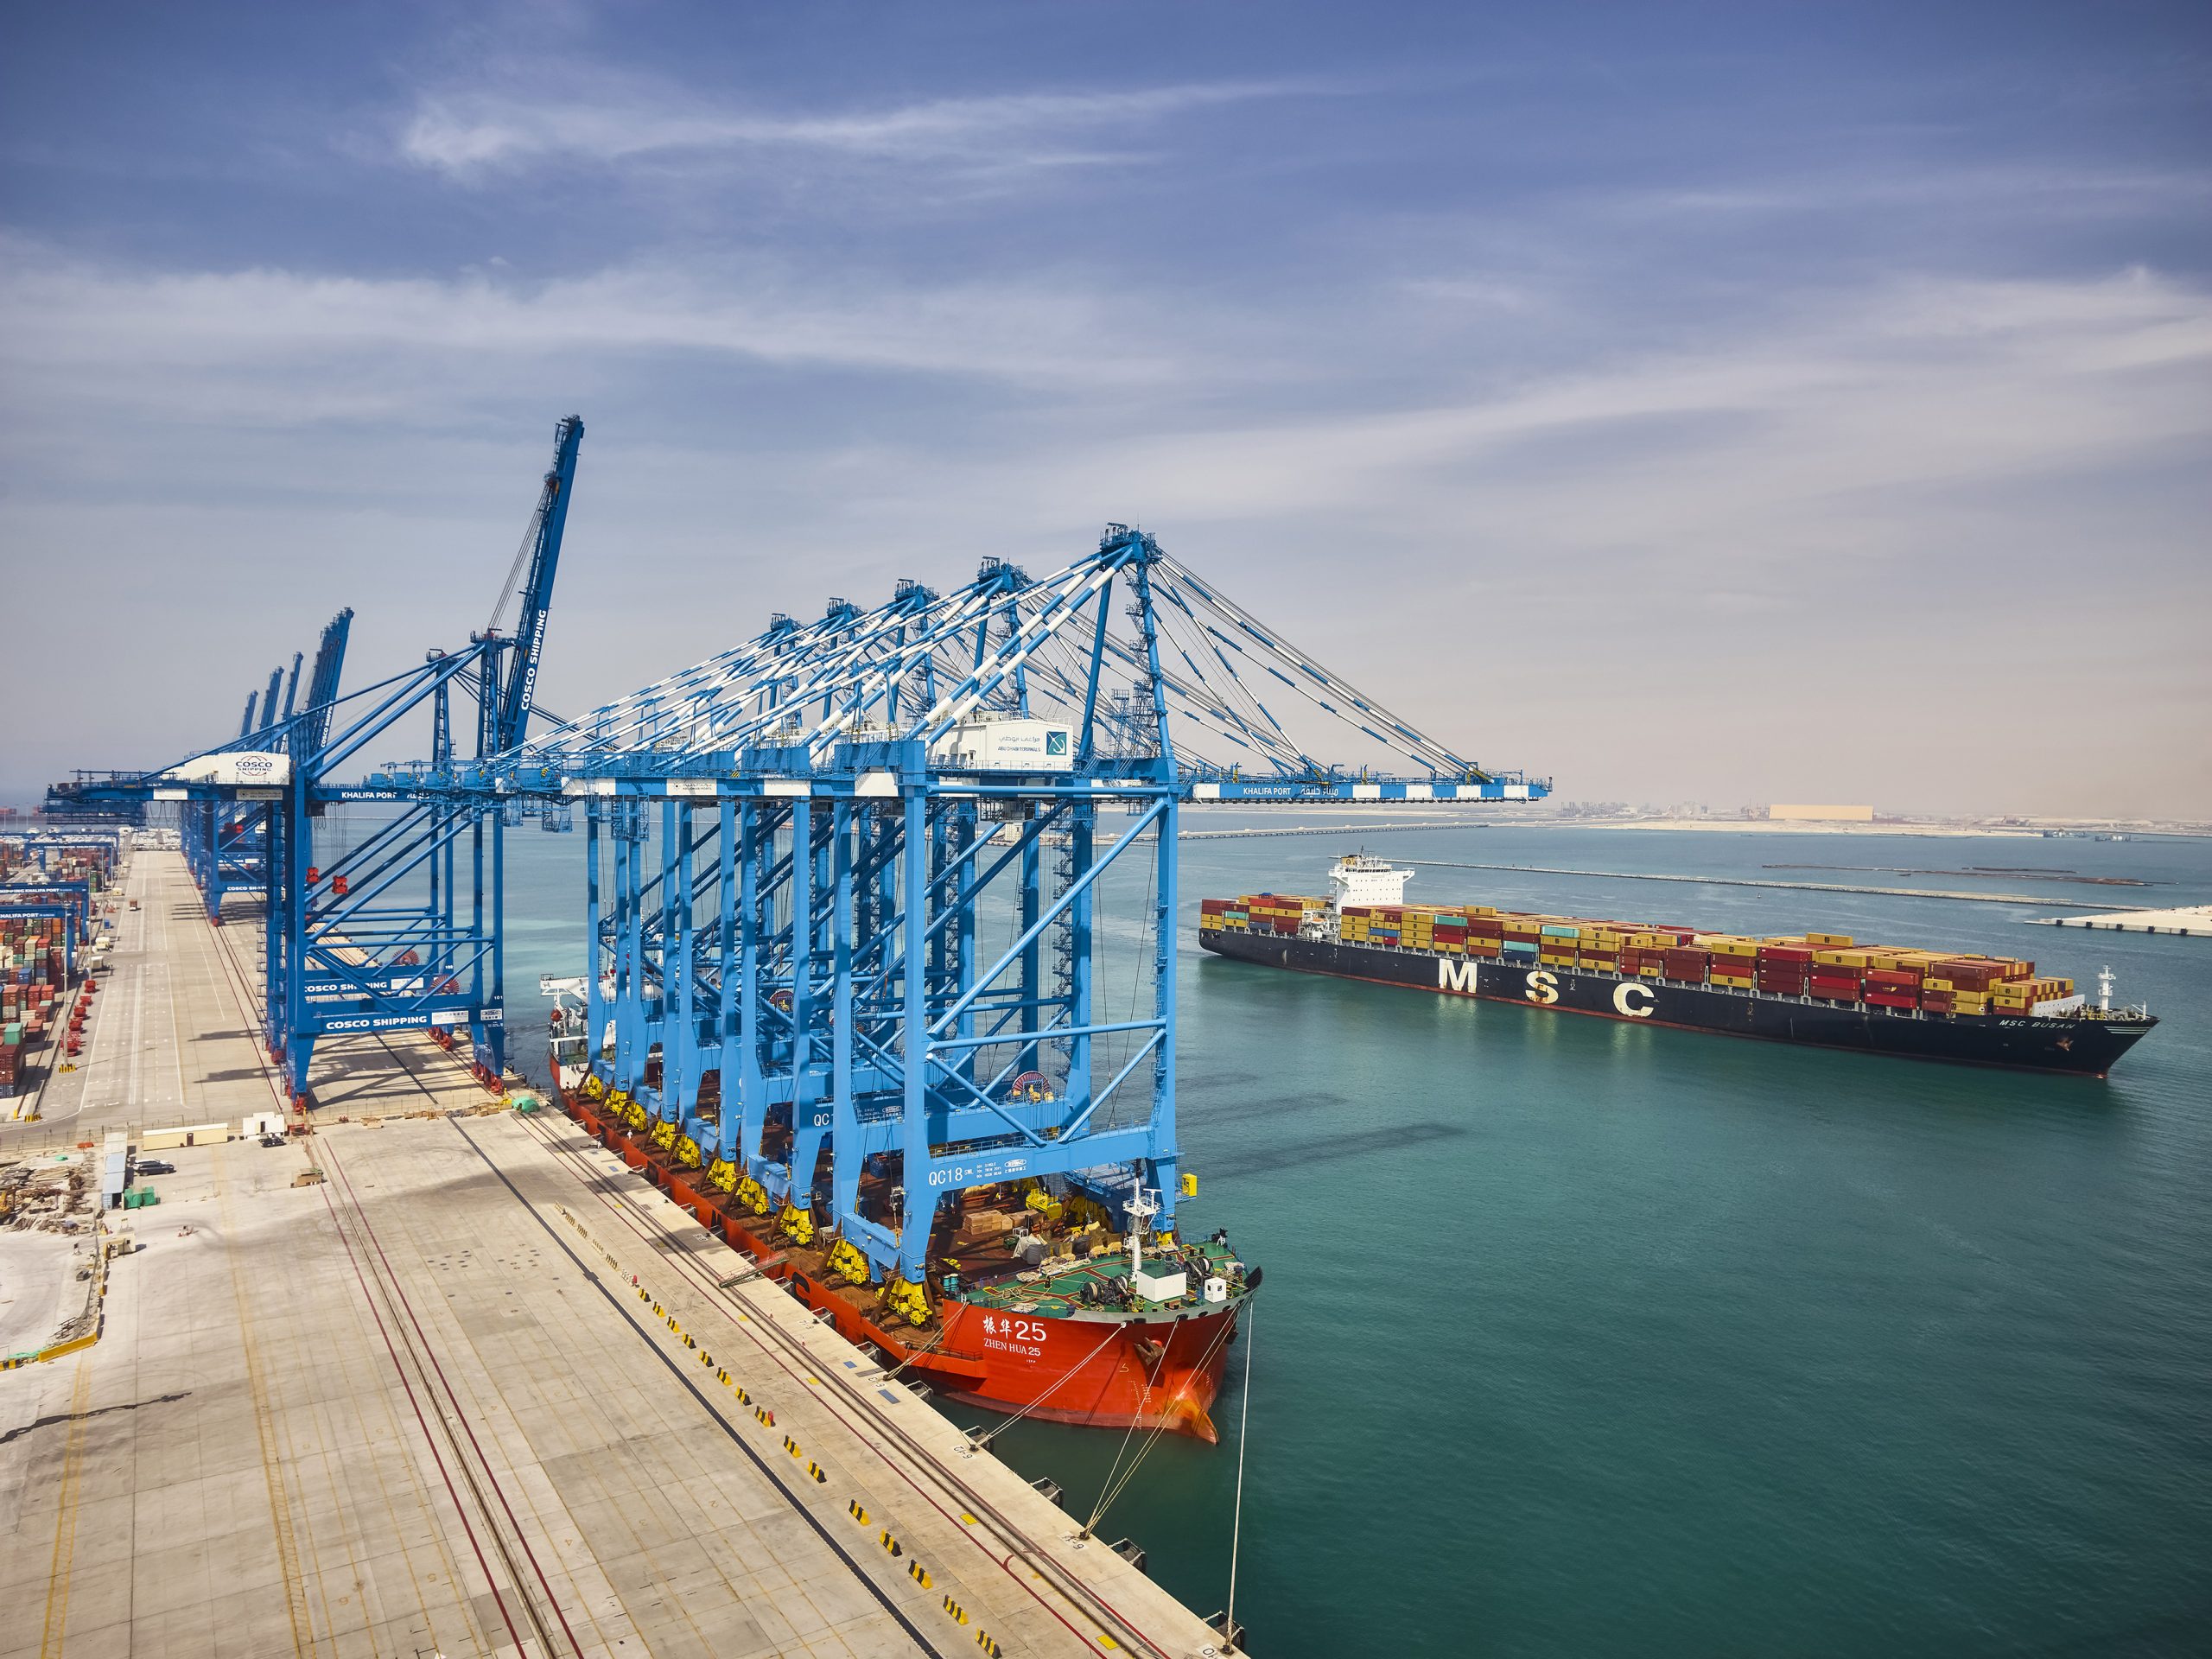 Abu Dhabi Terminals Receives 5 New Ship-To-Shore Cranes, Part of Expansion Plan to Double Capacity